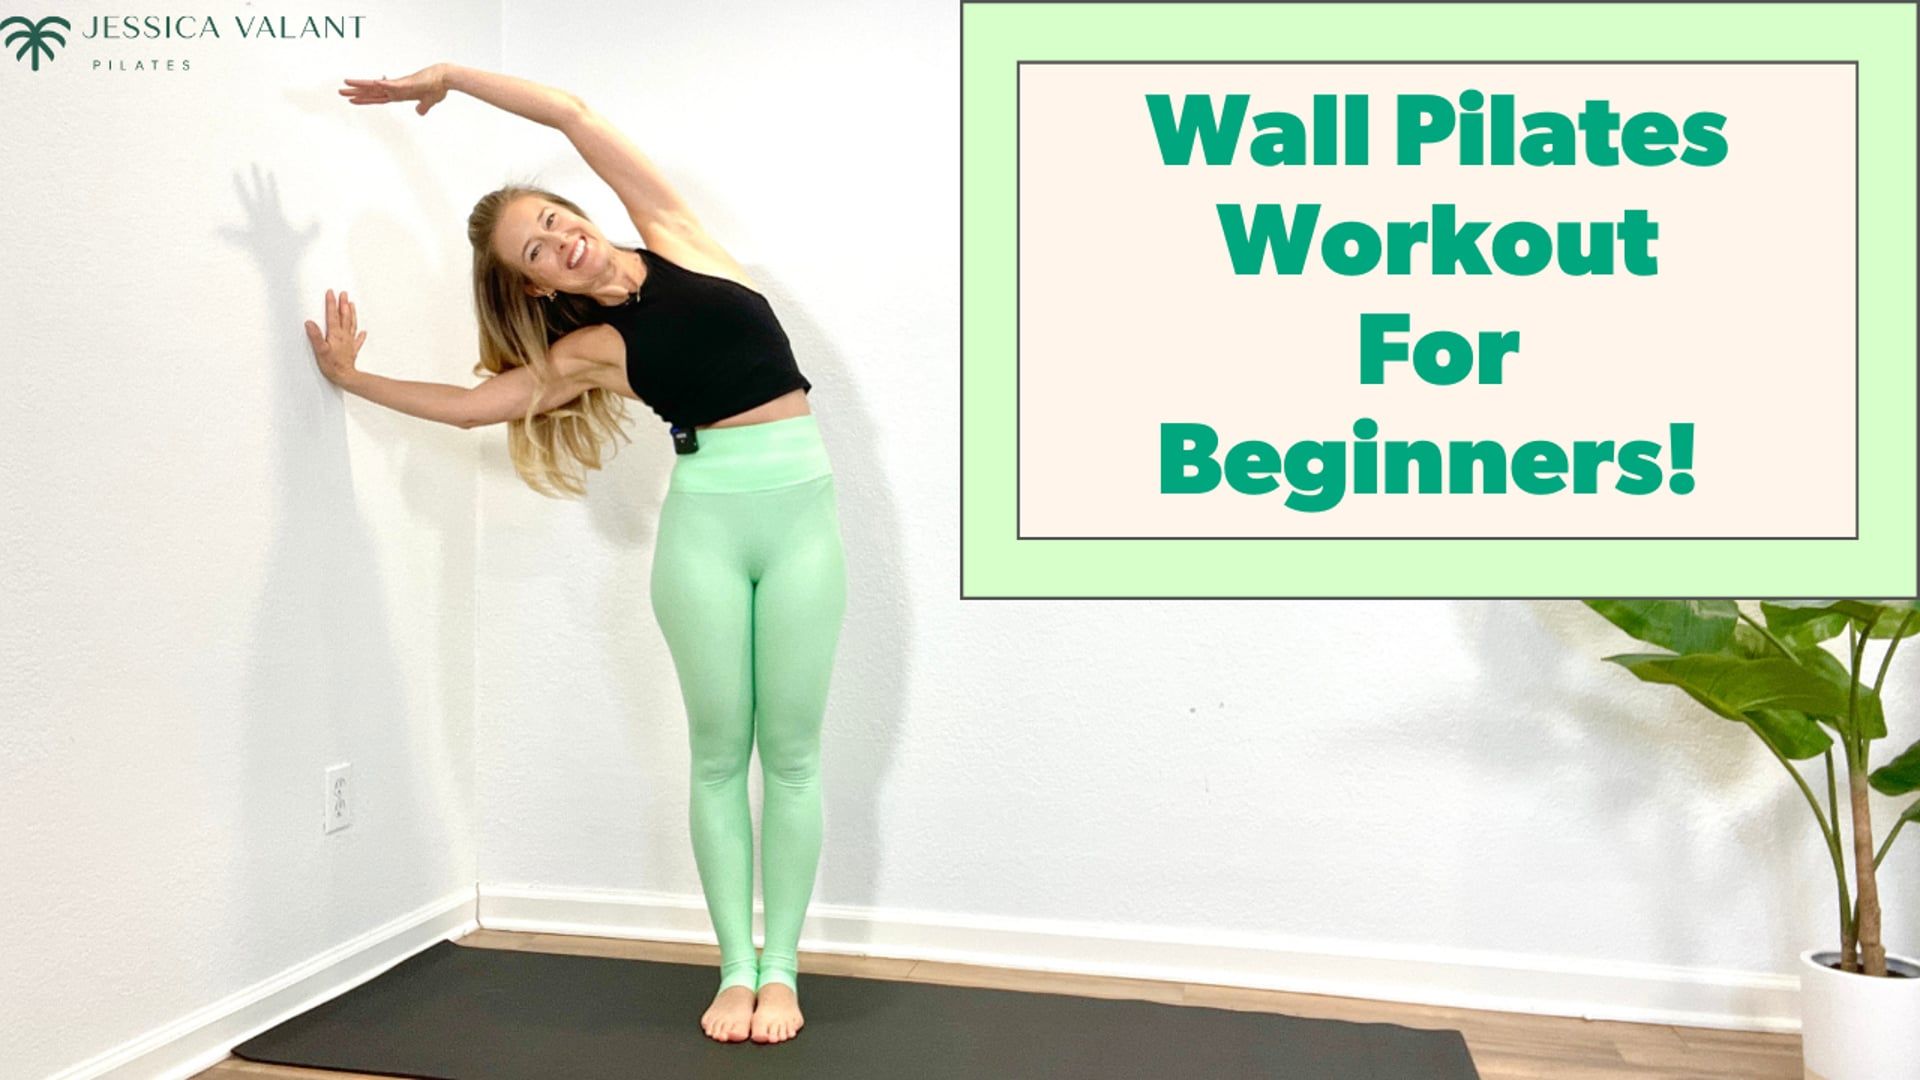 A 20-Minute Wall Pilates Workout for Beginners